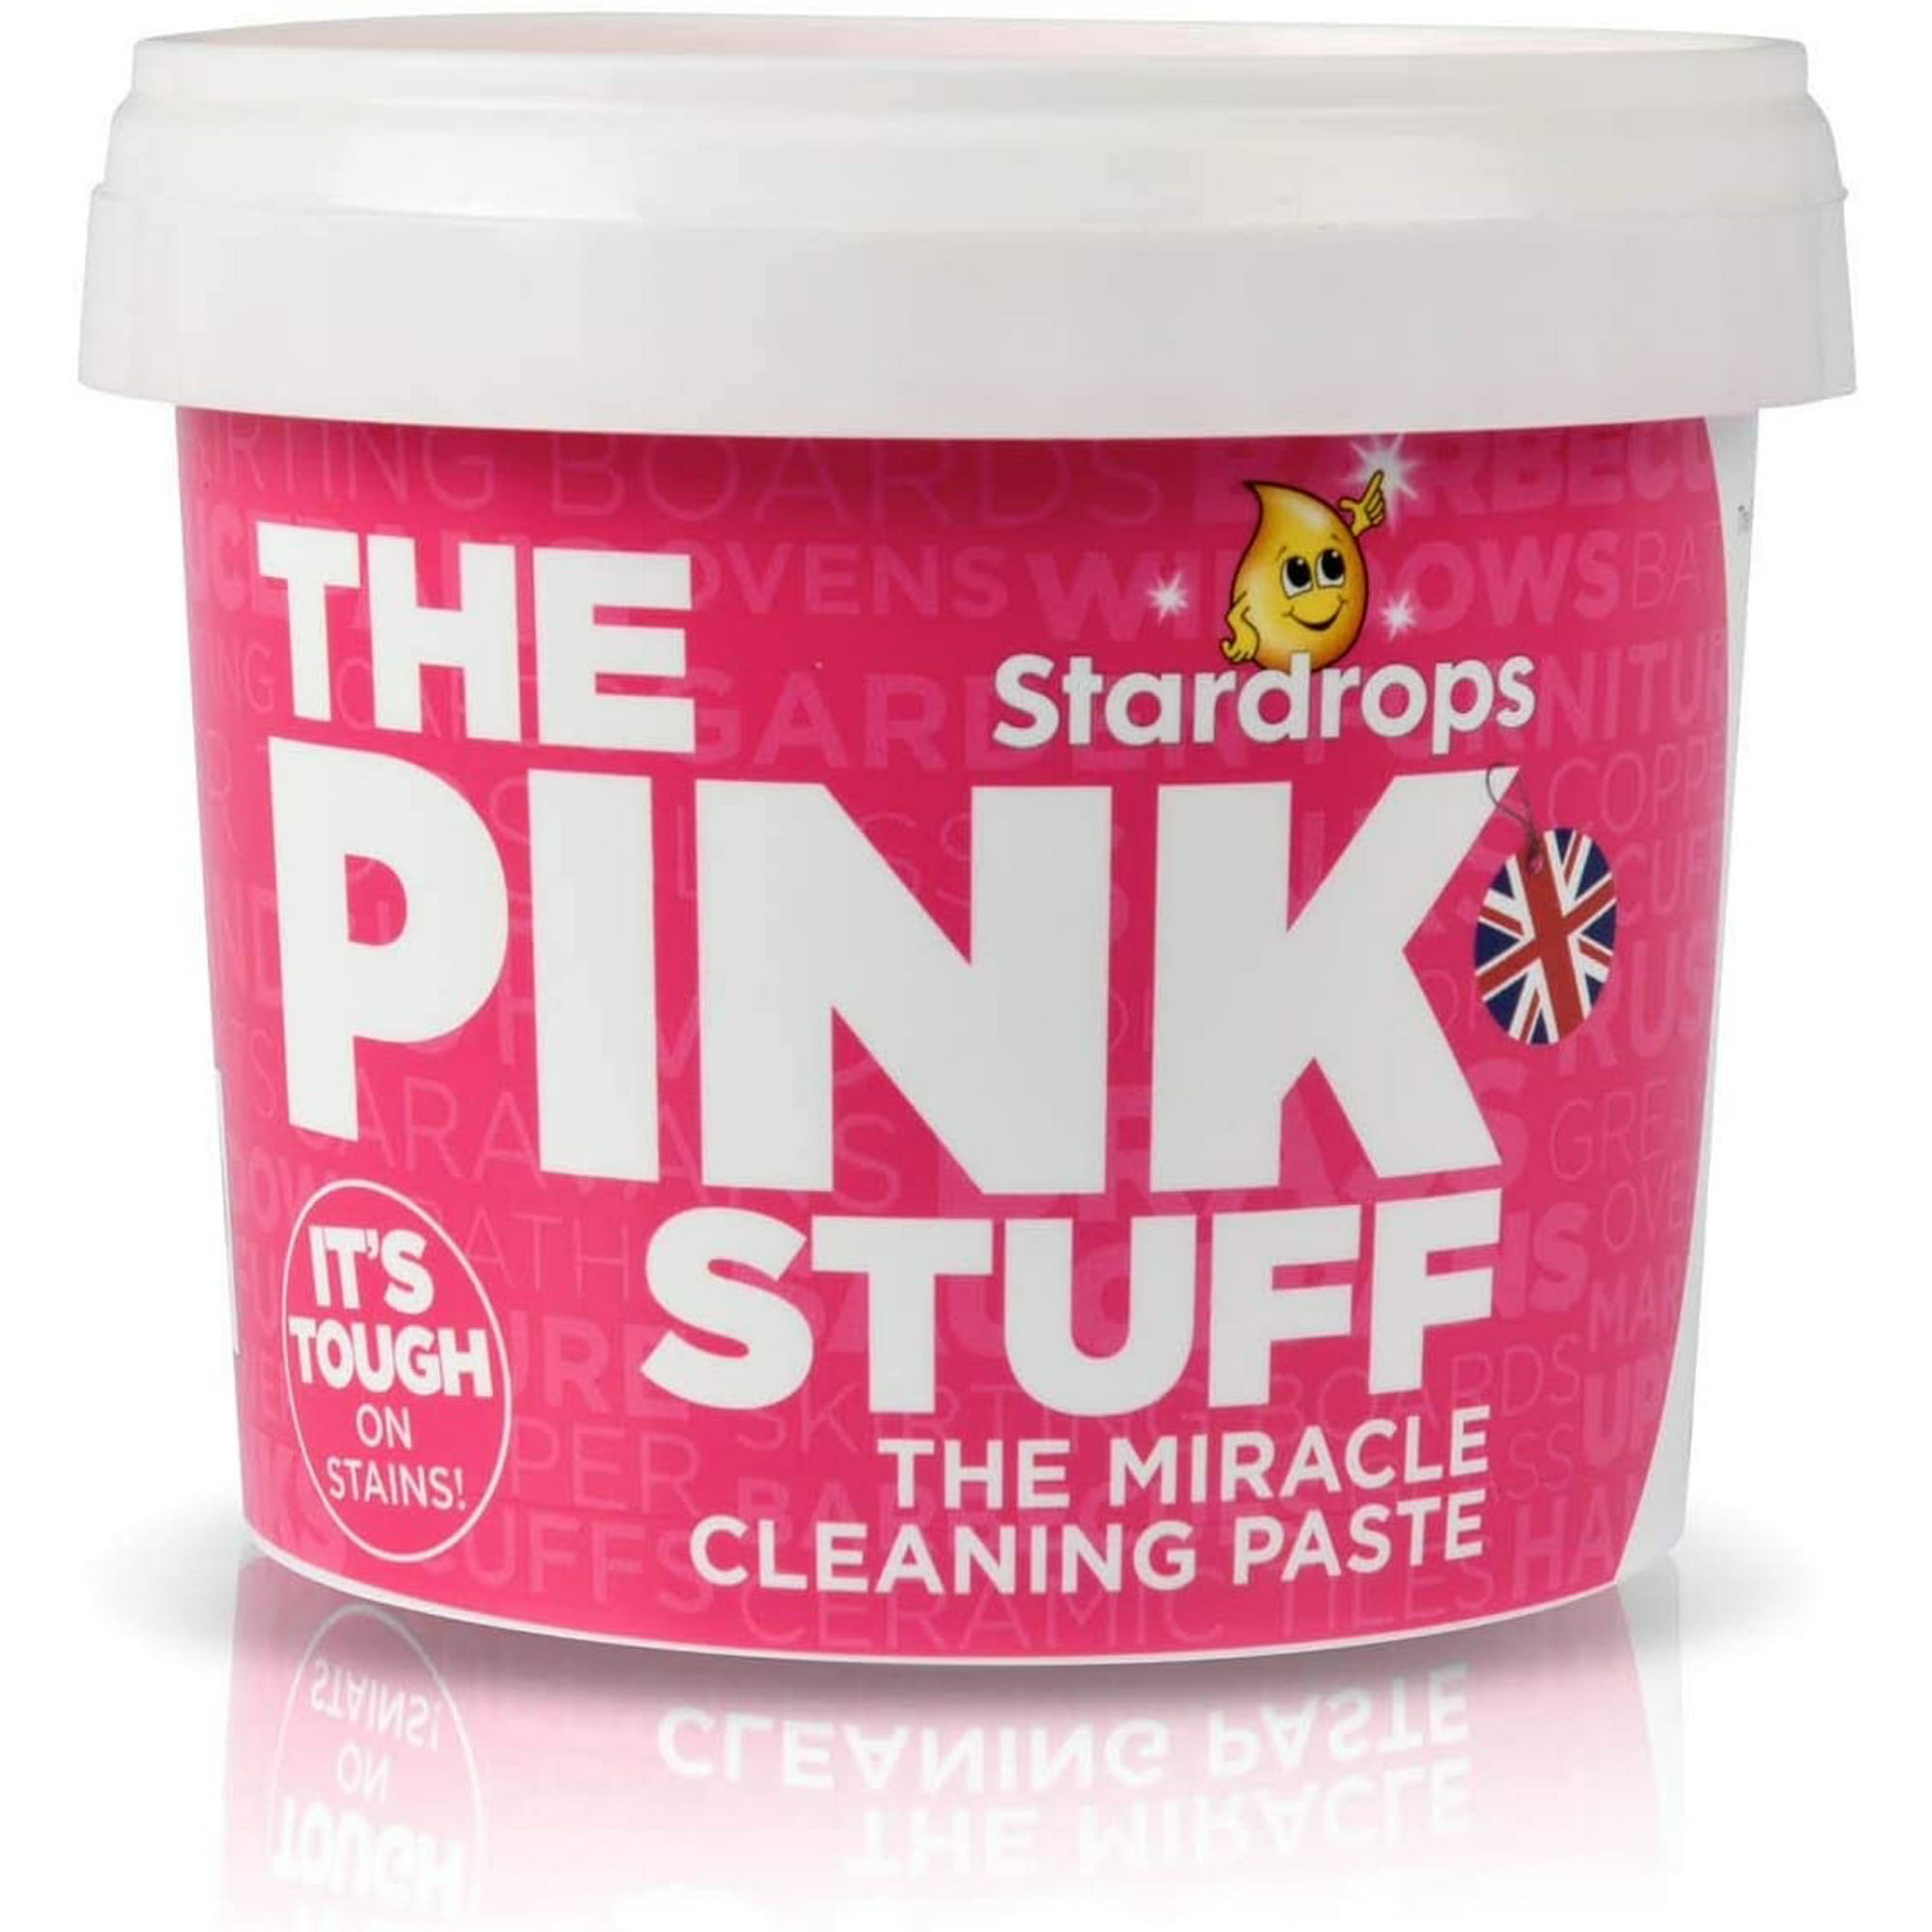 Stardrops The Pink Stuff reviews in Cleaning Appliances - ChickAdvisor